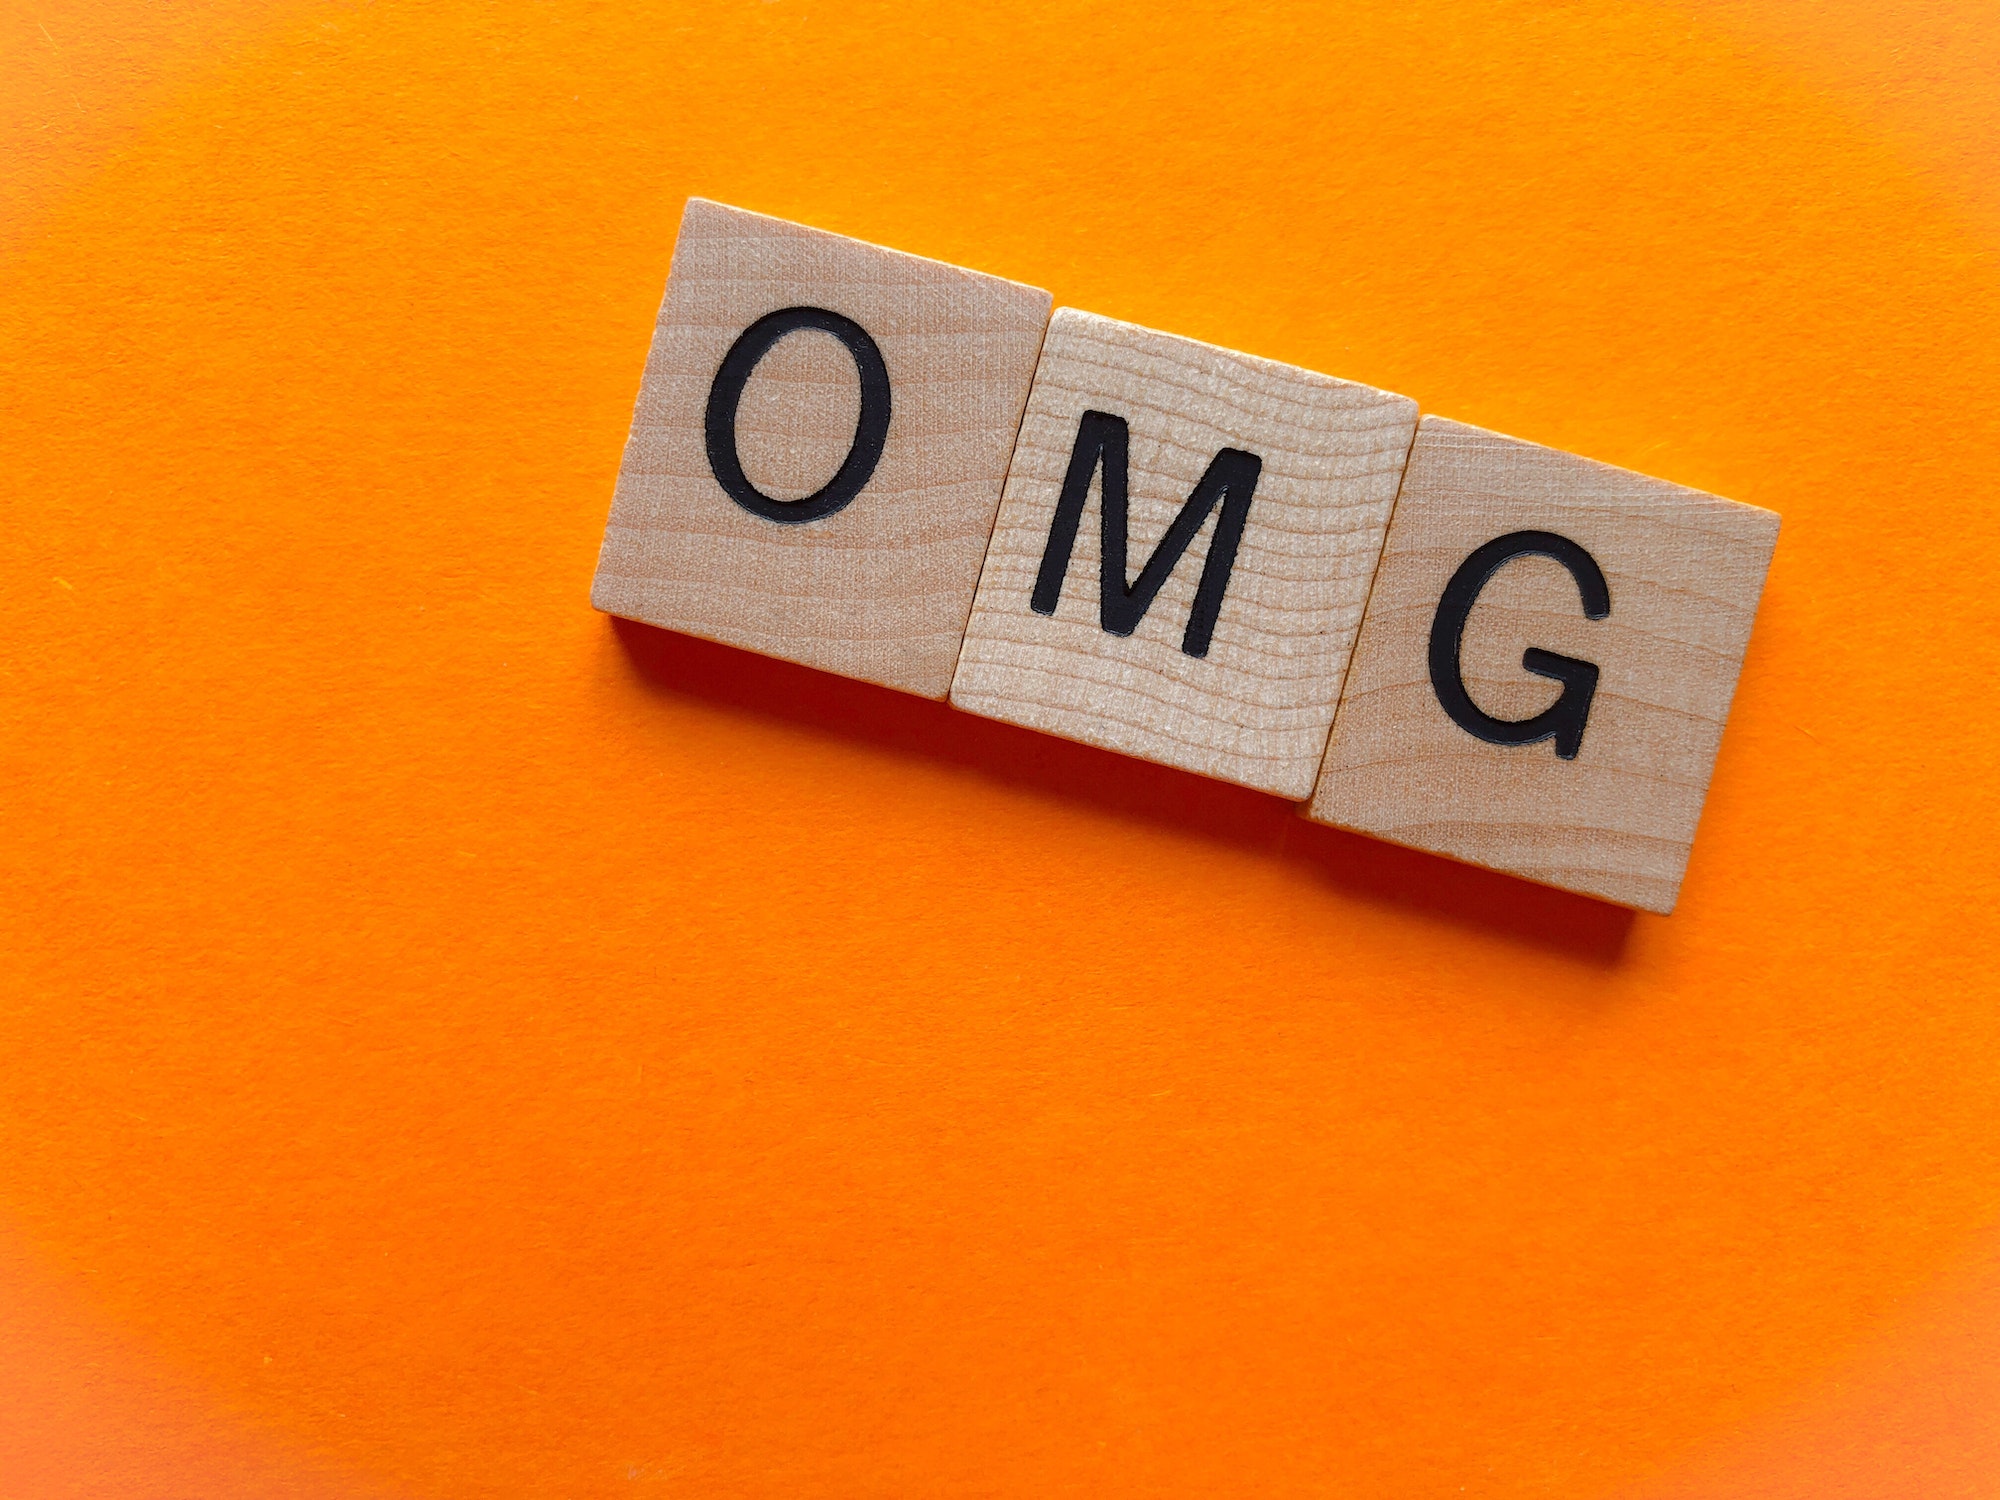 Internet Slang, OMG, Oh My God, in wooden letters on an orange background with copy space